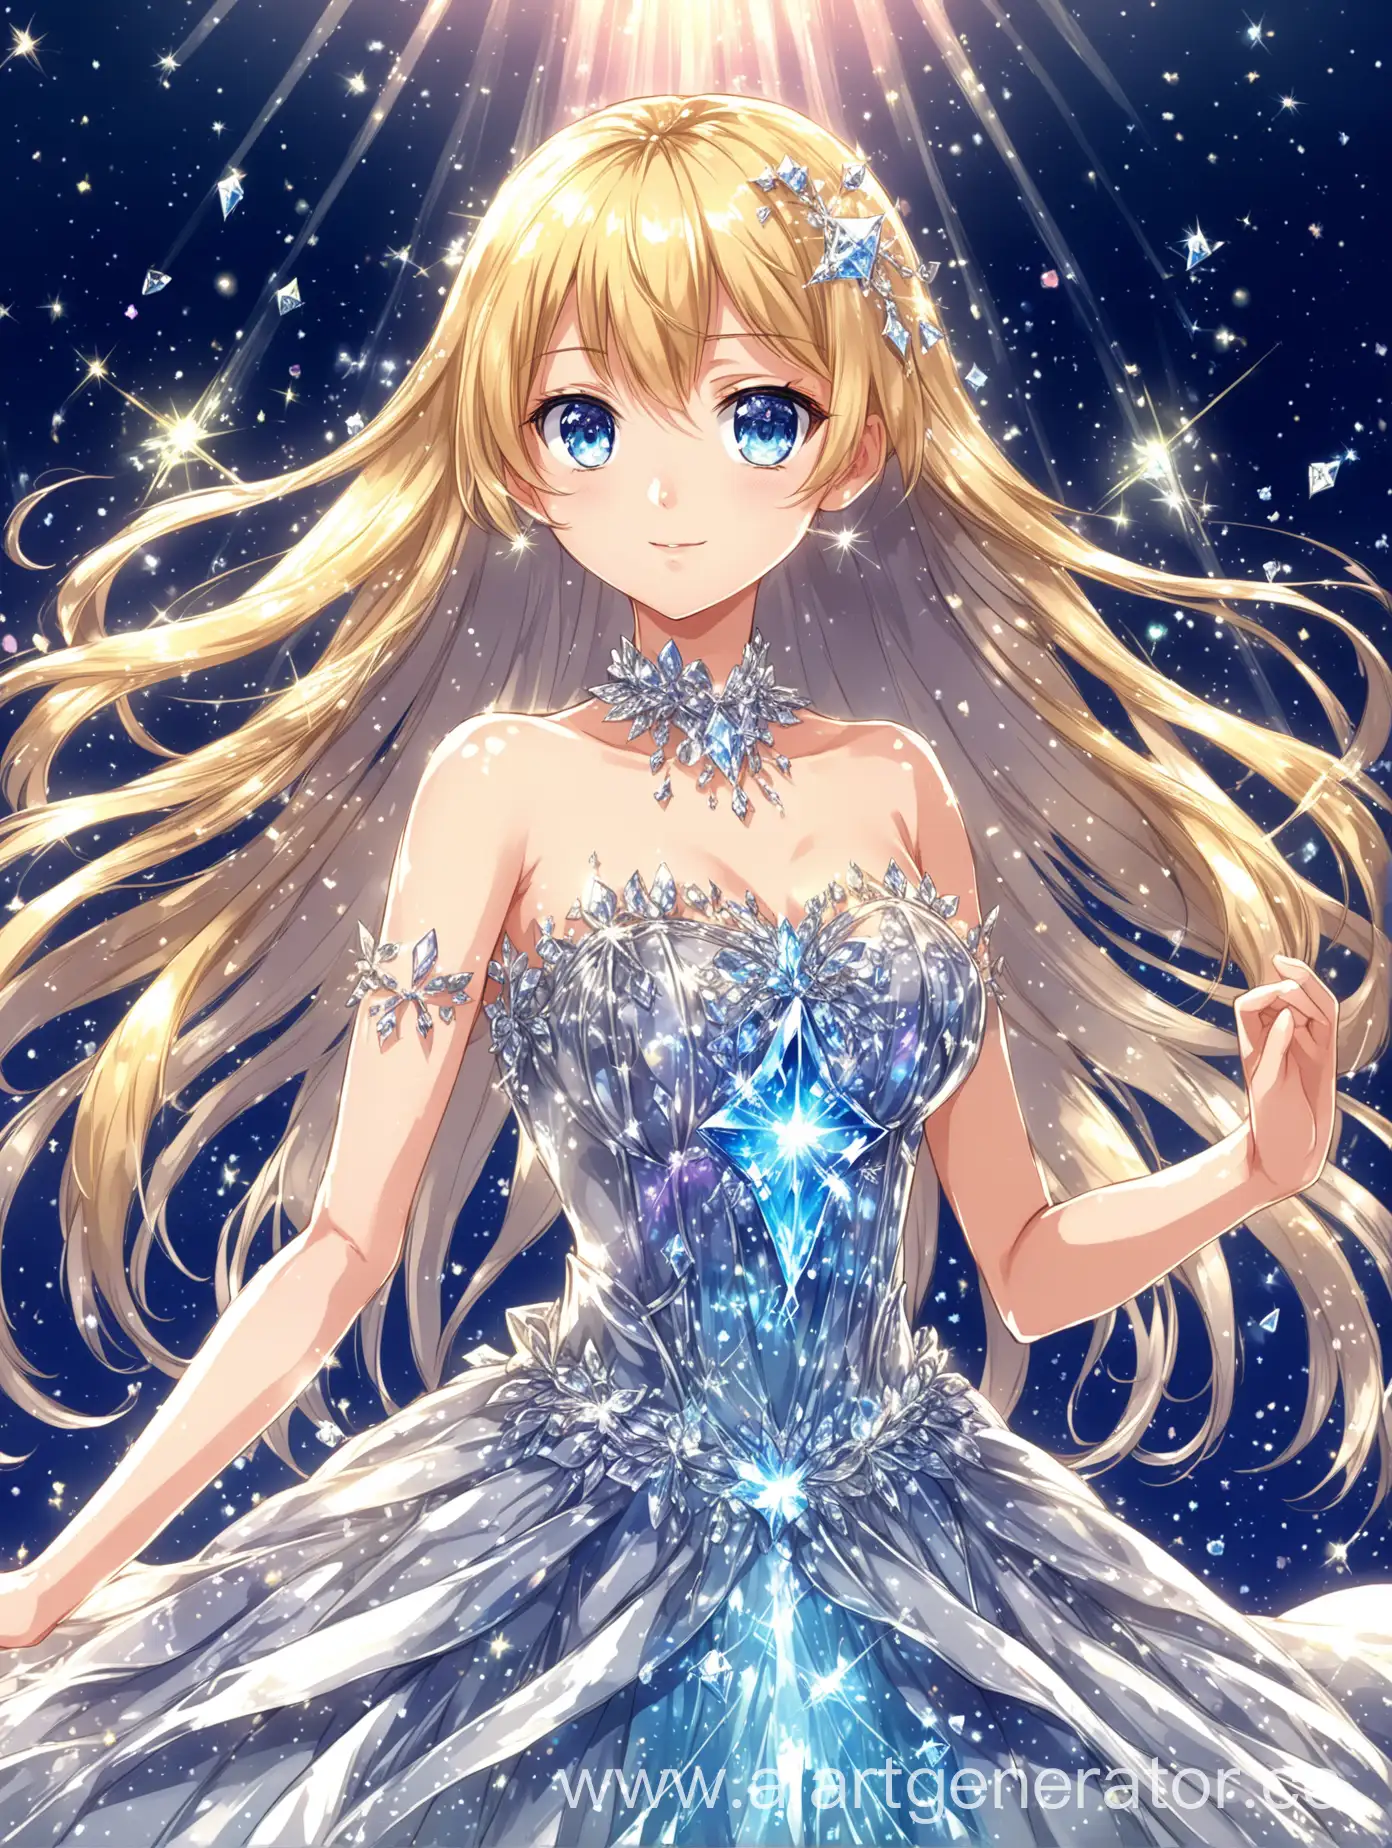 Magical-Anime-Girl-with-Dazzling-Diamond-Hair-and-Enchanted-Dress